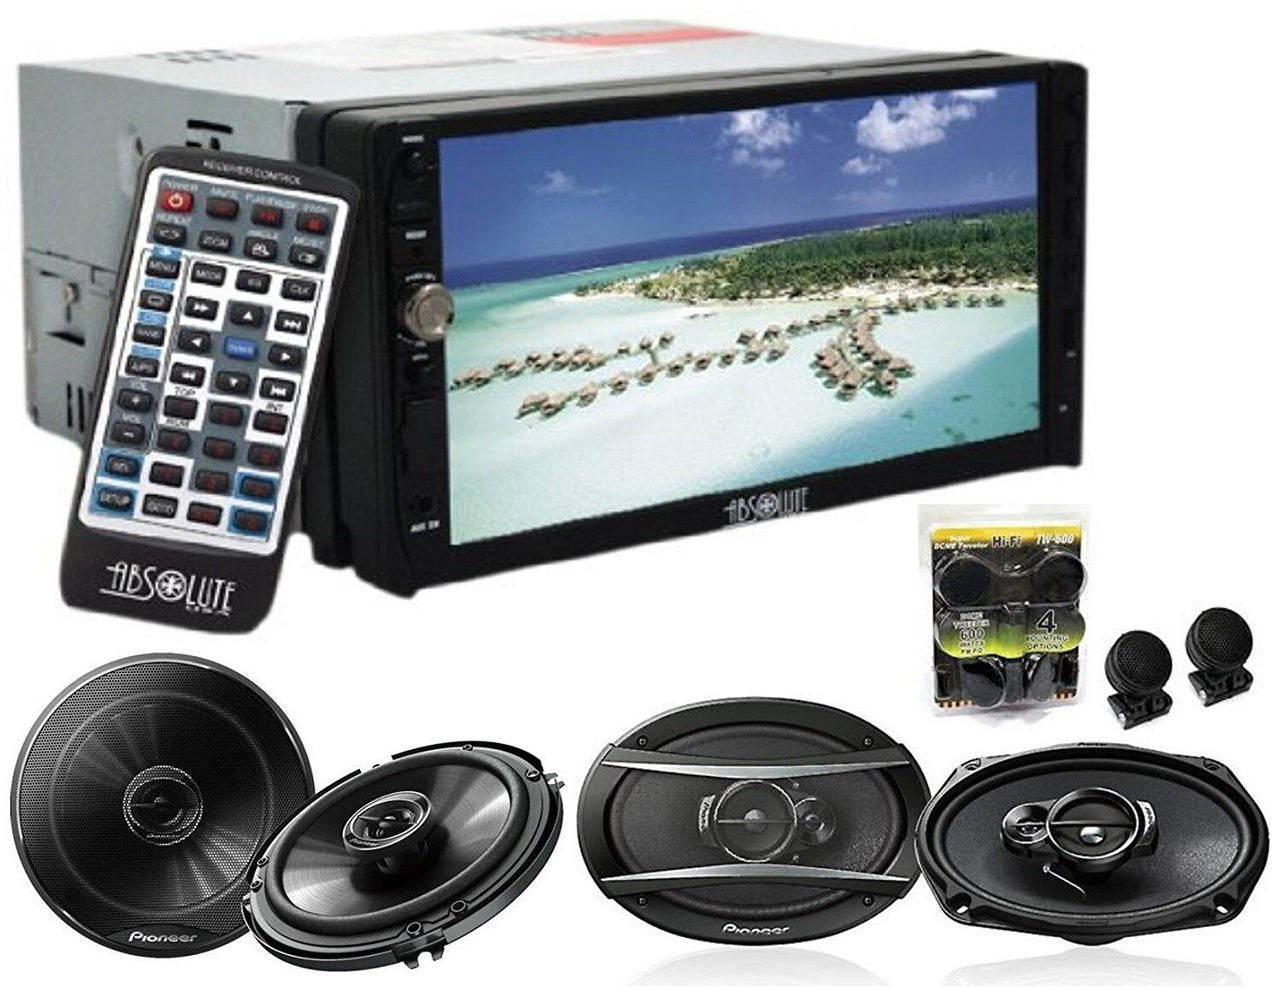 Absolute DD-3000 7-Inch Double Din Multimedia DVD Player With Pioneer  TS-G1620F, TS-G6930F TW600 Tweeter<br/>7" DVD CD MP3 player Double Din head unit car stereo with pioneer TS-G1620F, TS-G6930F speakers & TW600 tweeter